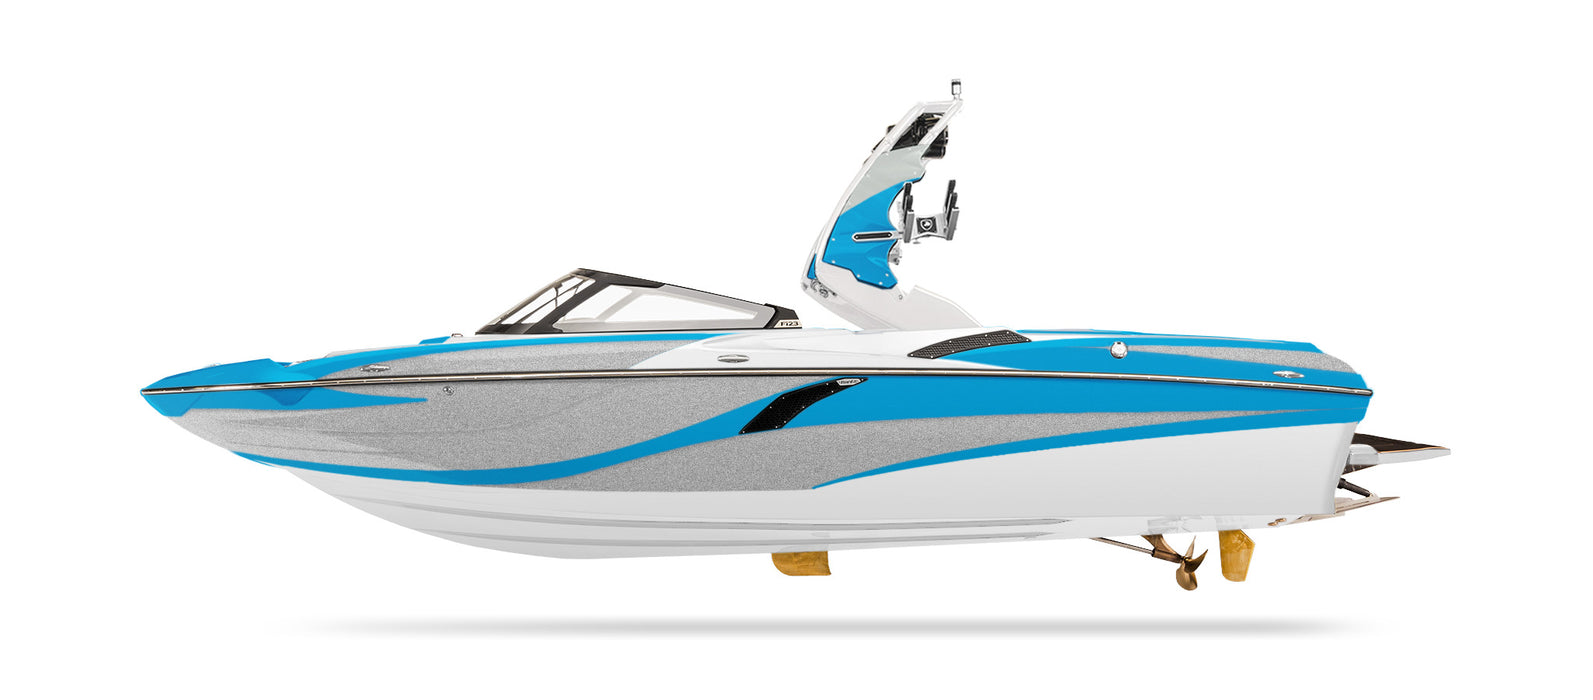 Centurion Fi 23 wakeboard Surf boat for rent on Lake Powell